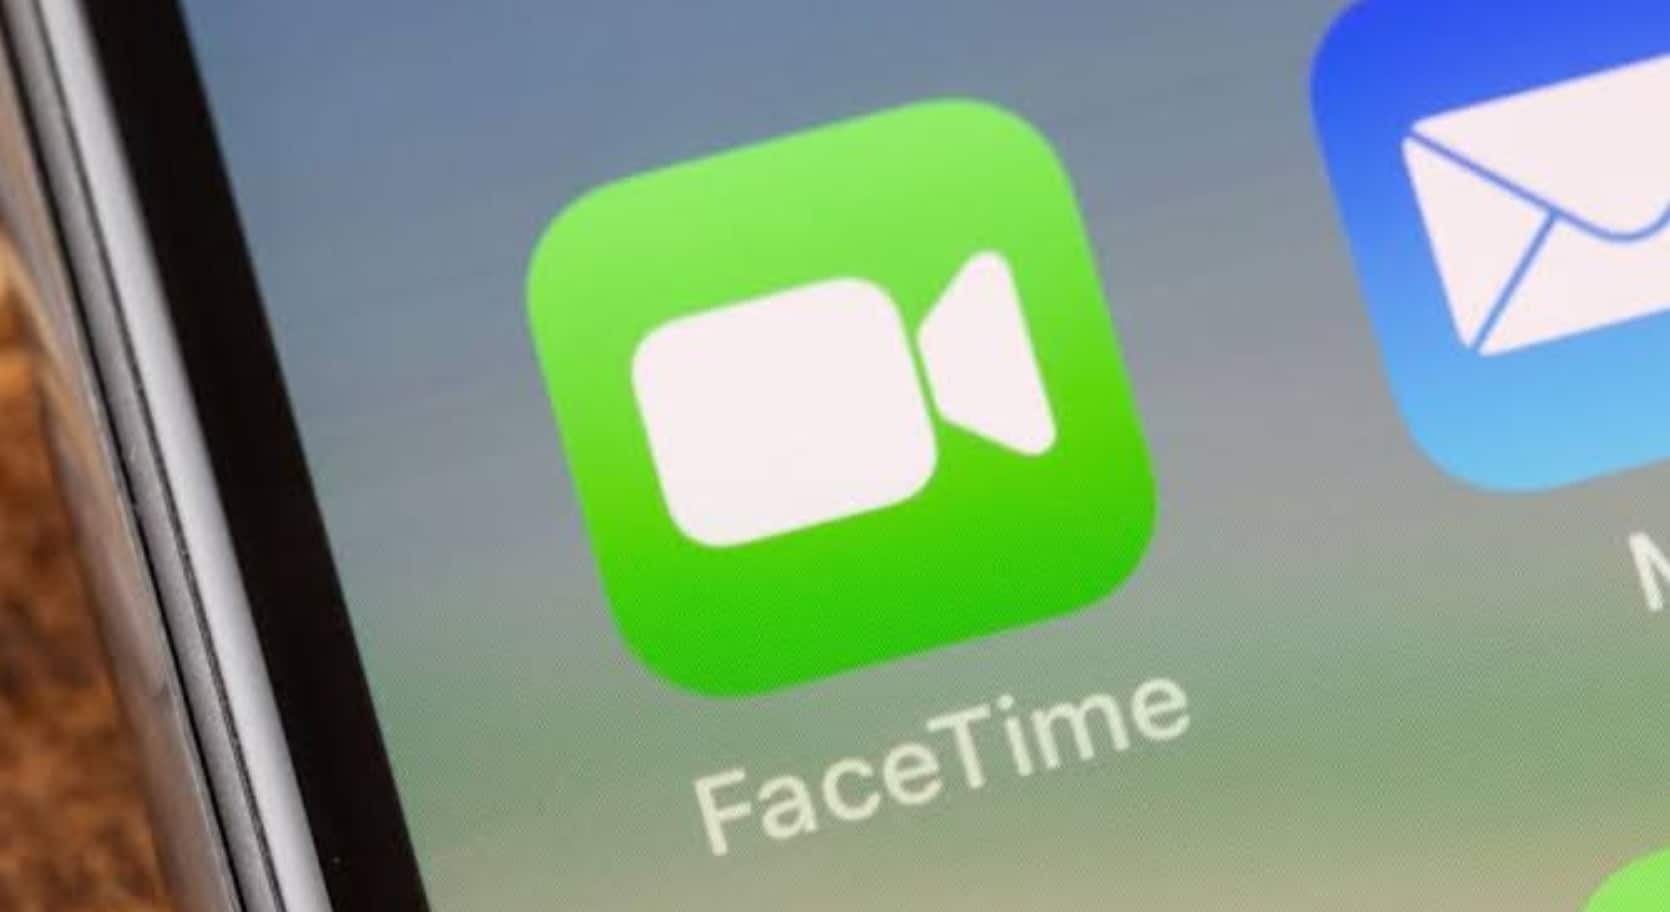 Apple Adds FaceTime Framework to tvOS, HomePod Amid Speaker With Screen Rumours